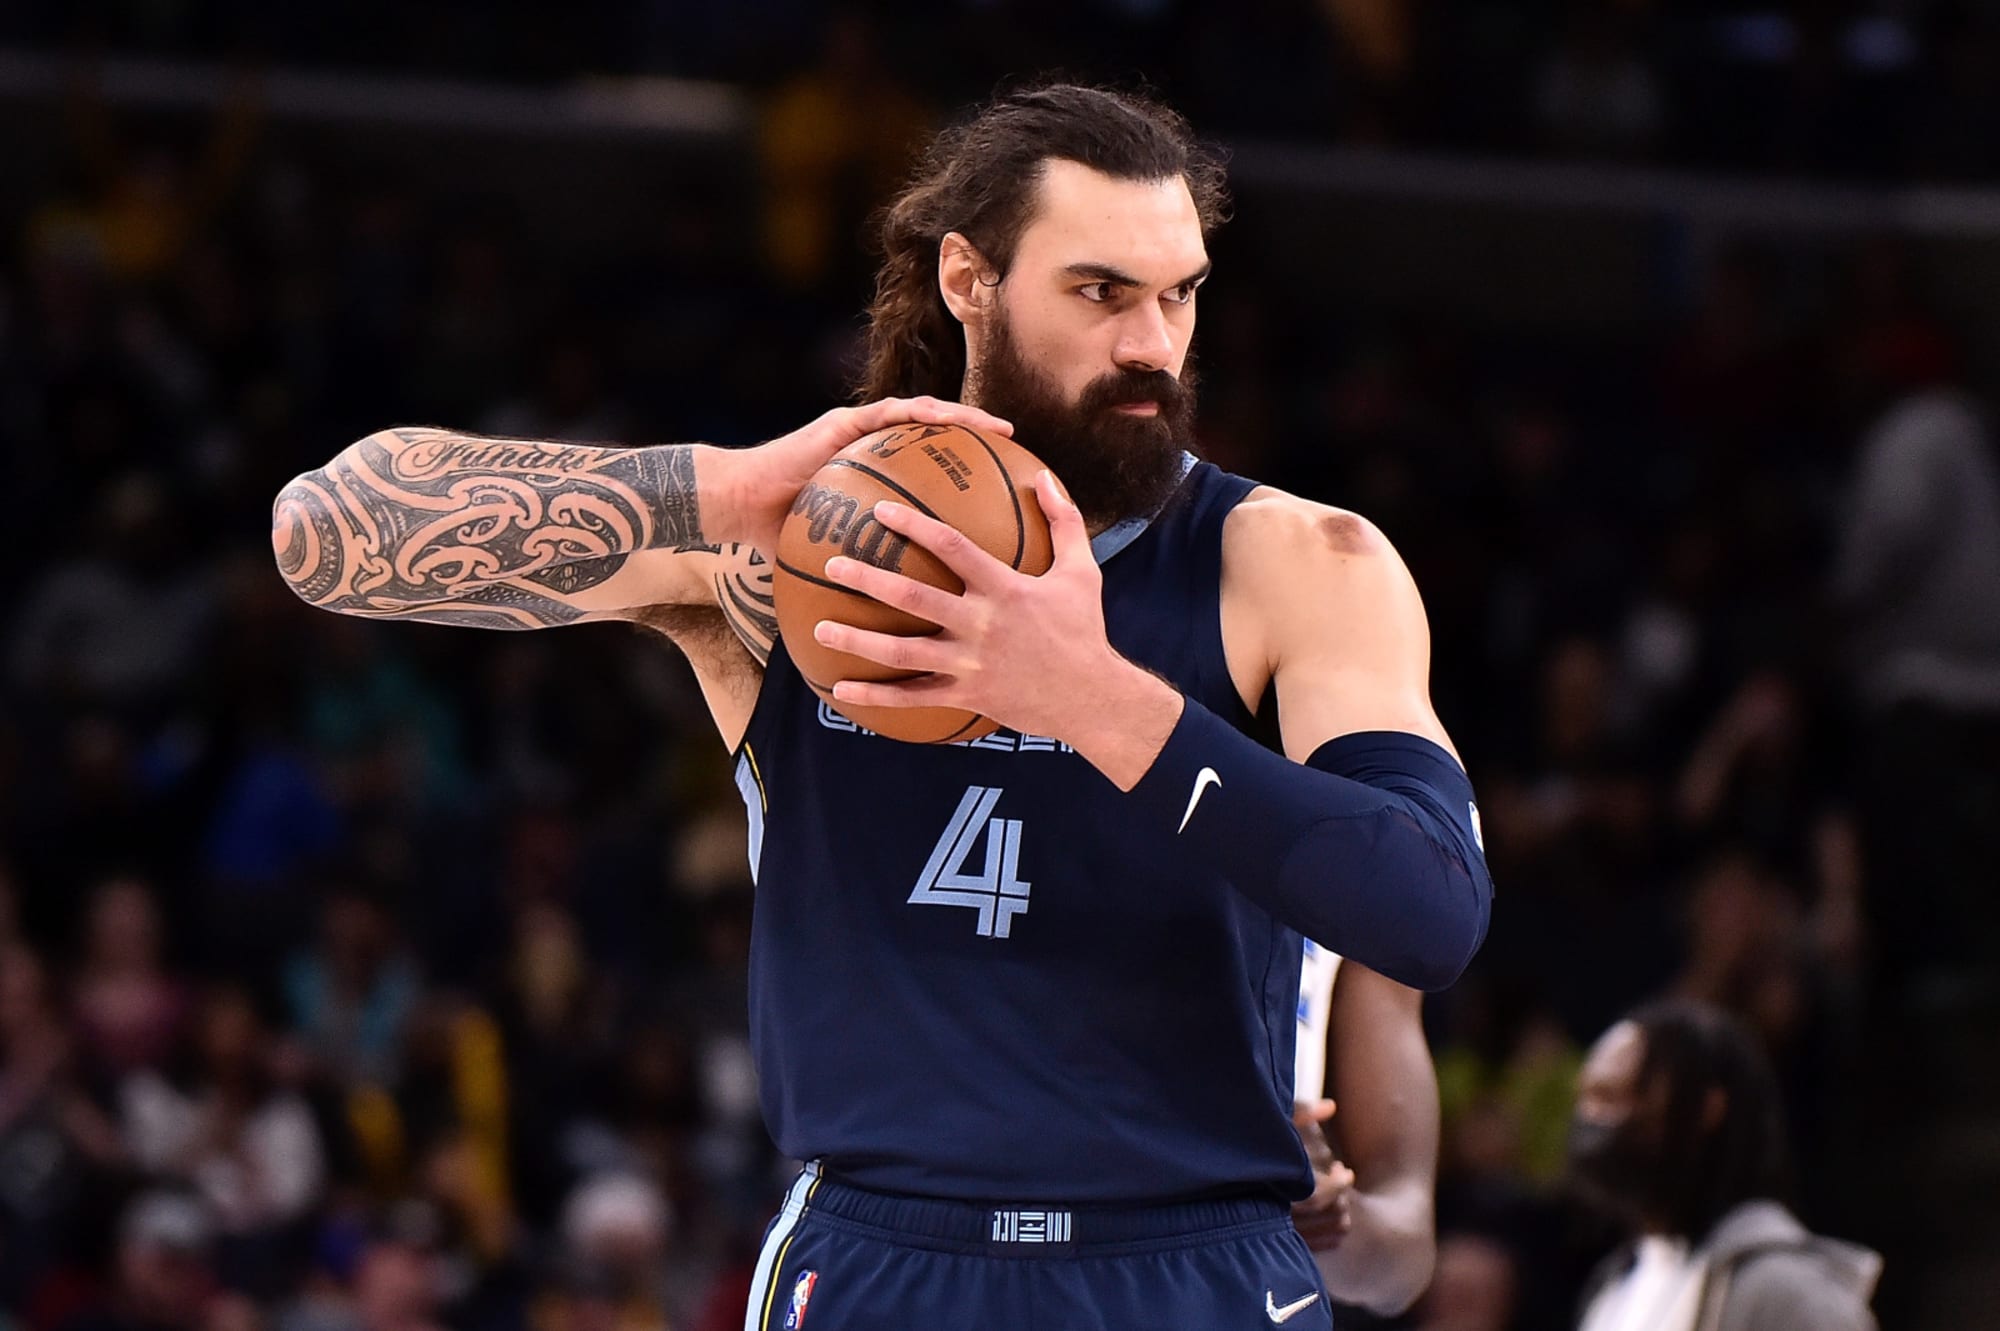 Could Steven Adams be the key to success for Grizzlies in 2022-23?